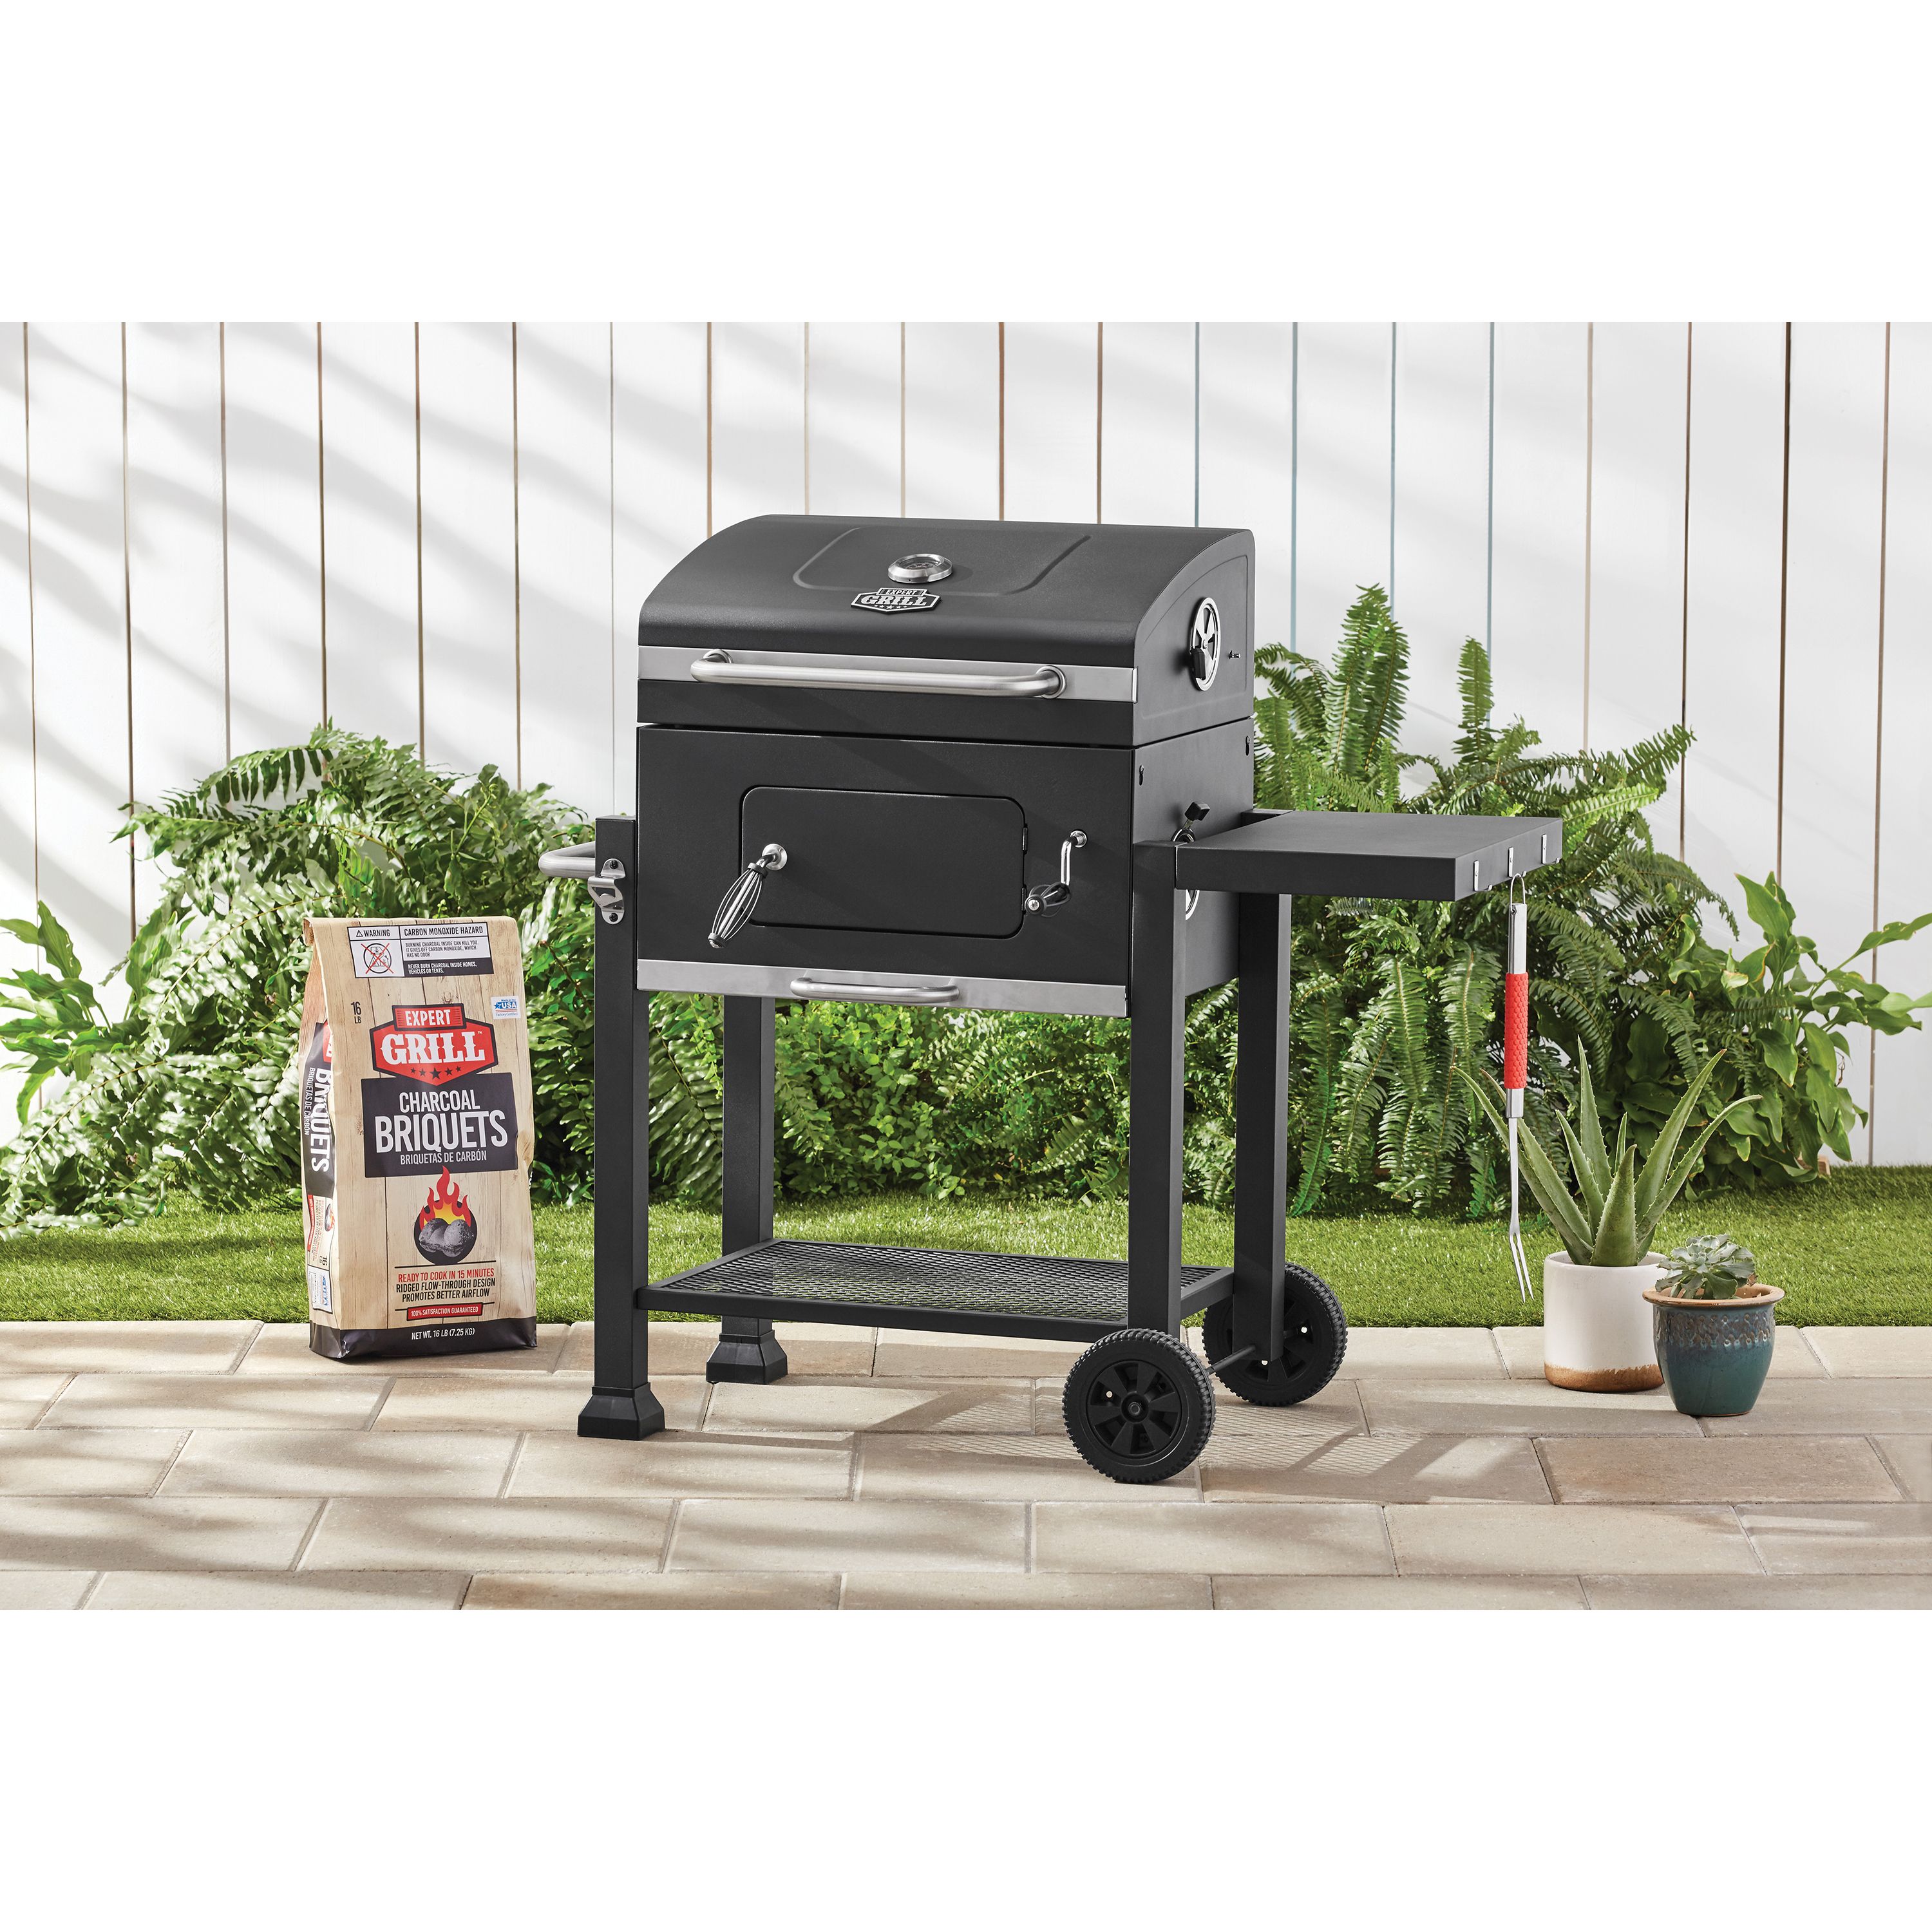 Expert Grill Heavy Duty 24-inch Charcoal Grill, Black - image 4 of 13